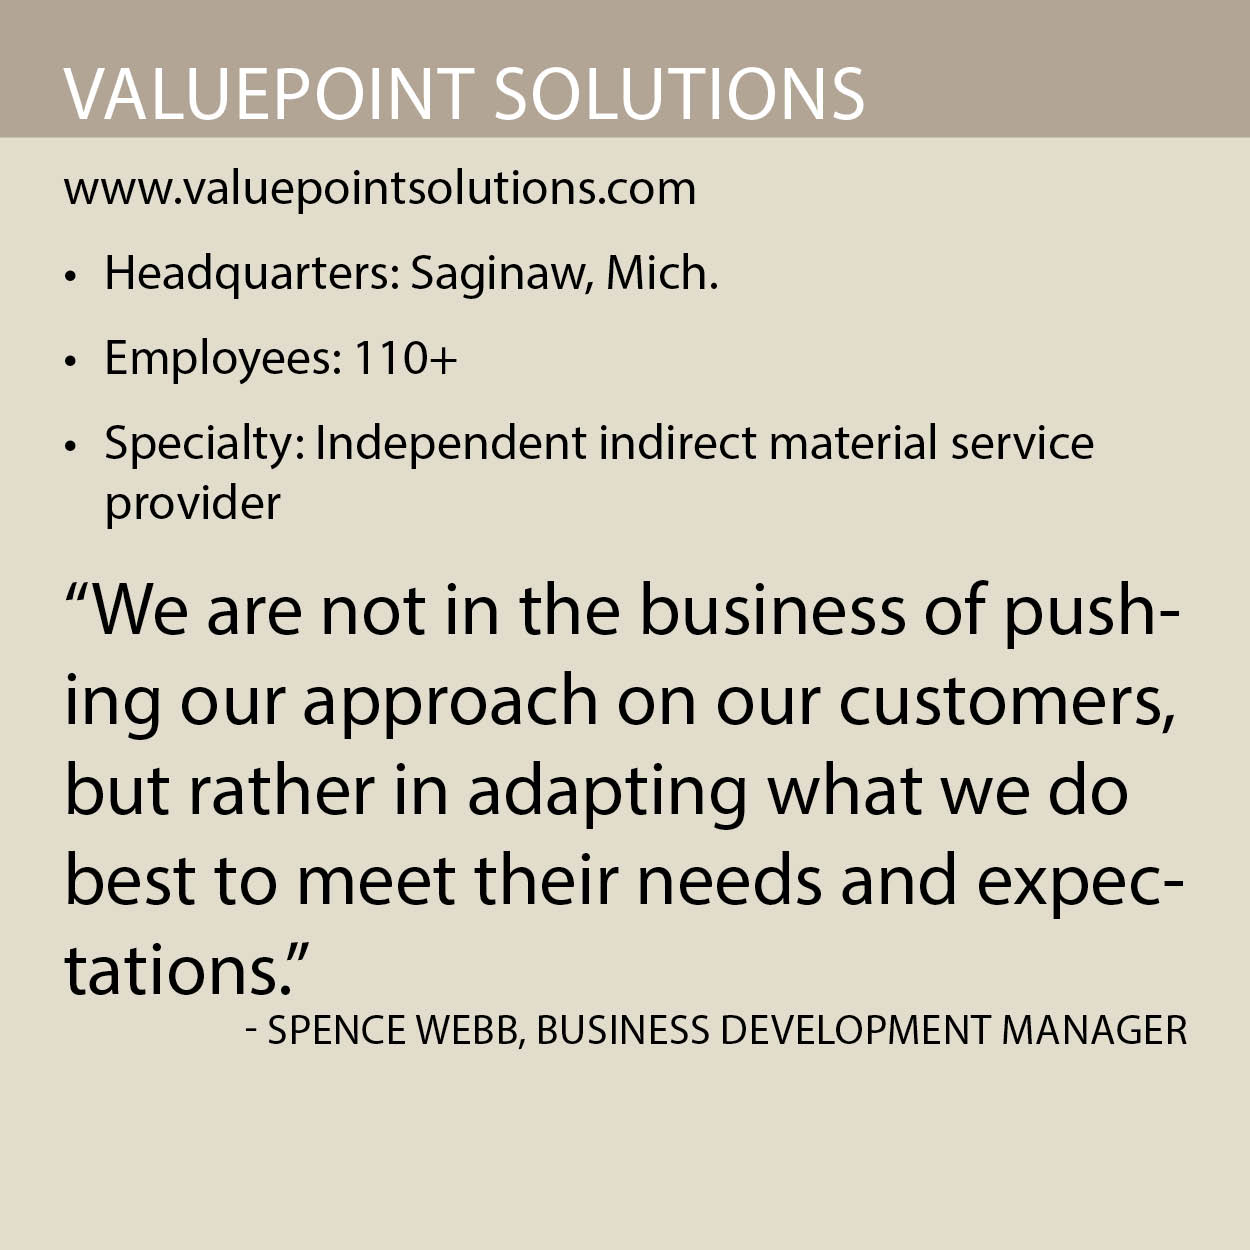 ValuePoint Solutions fact box